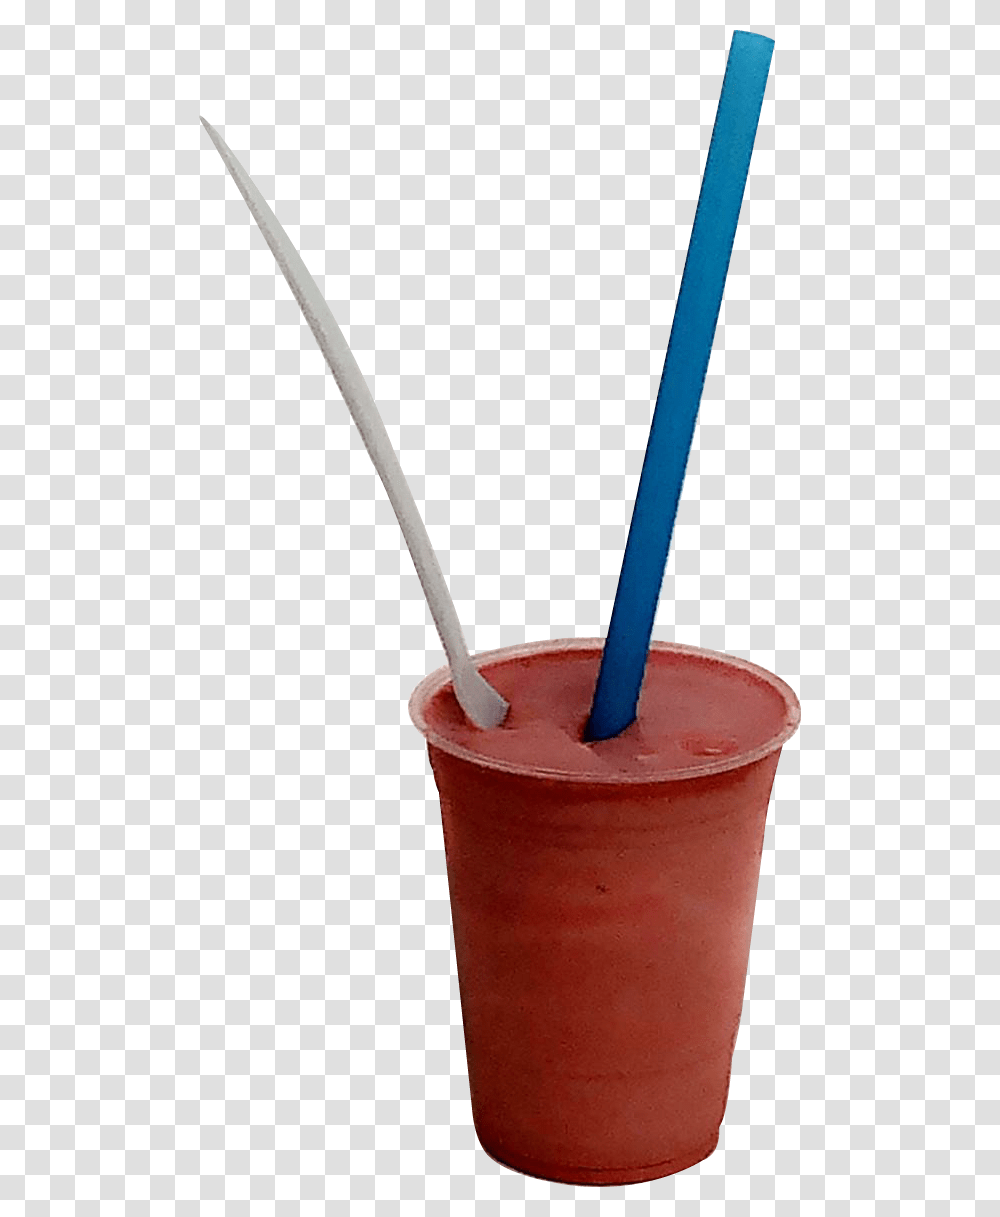 Shakes Floats And Freezes At Triangle Drive In, Juice, Beverage, Drink, Smoothie Transparent Png